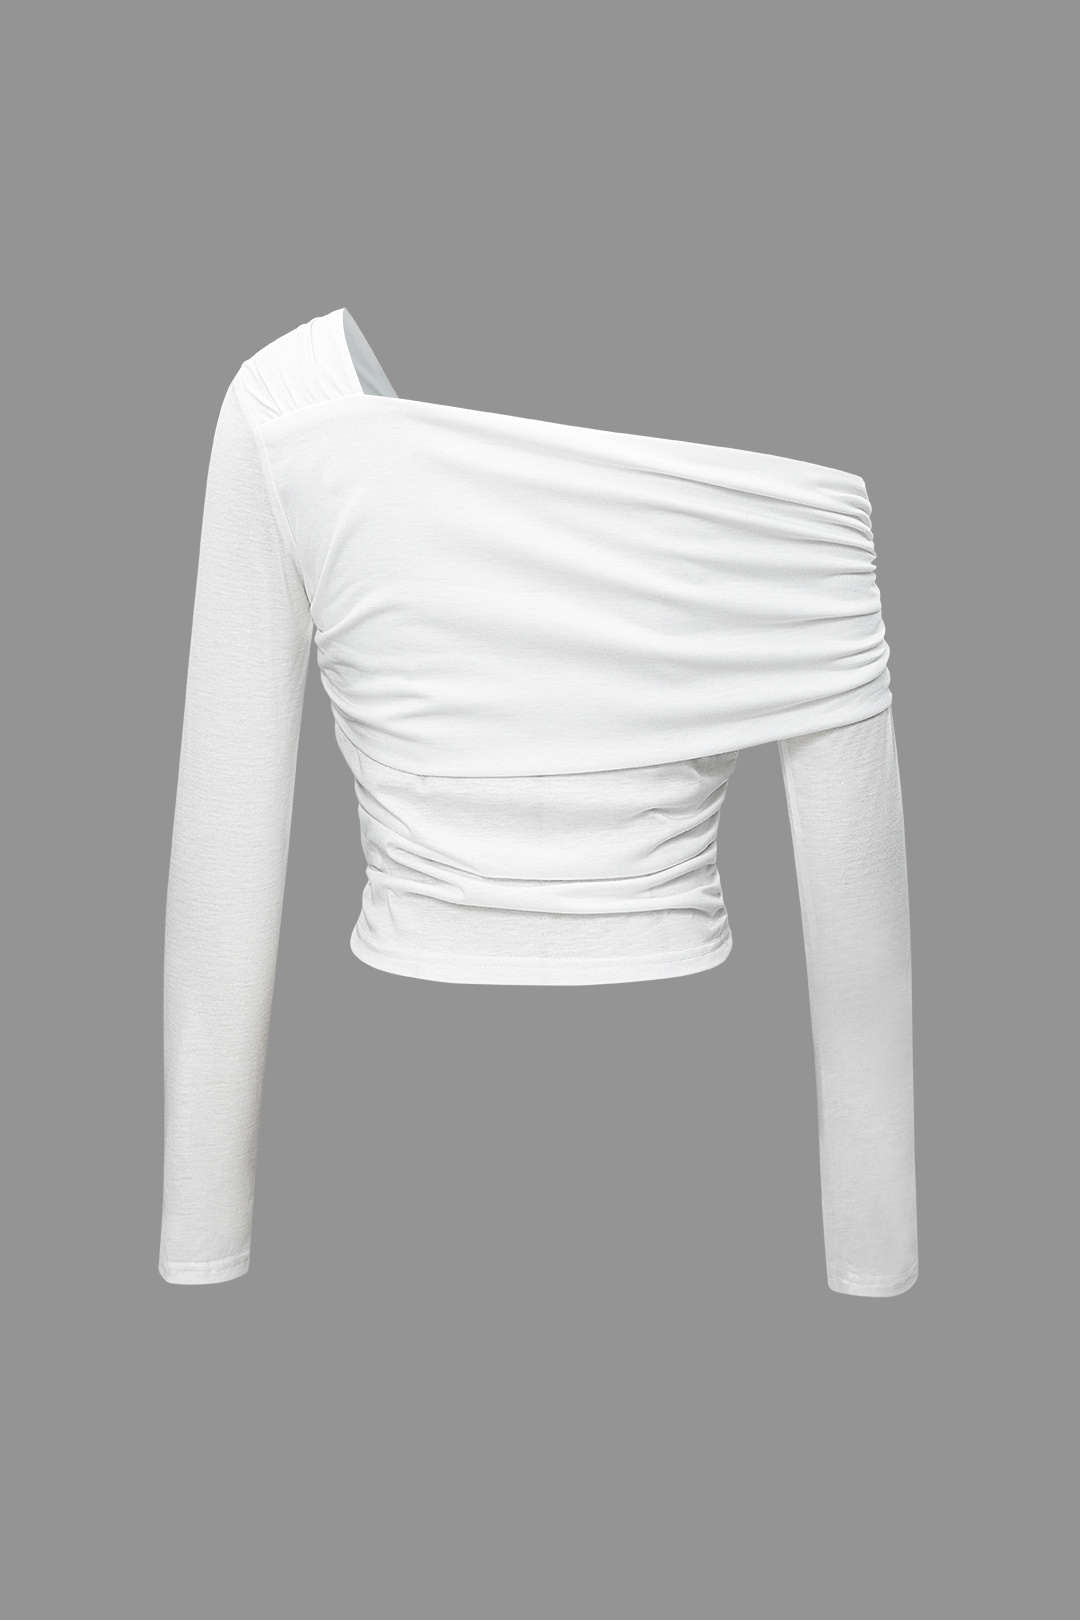 Asymmetrical Ruched Long Sleeve Top